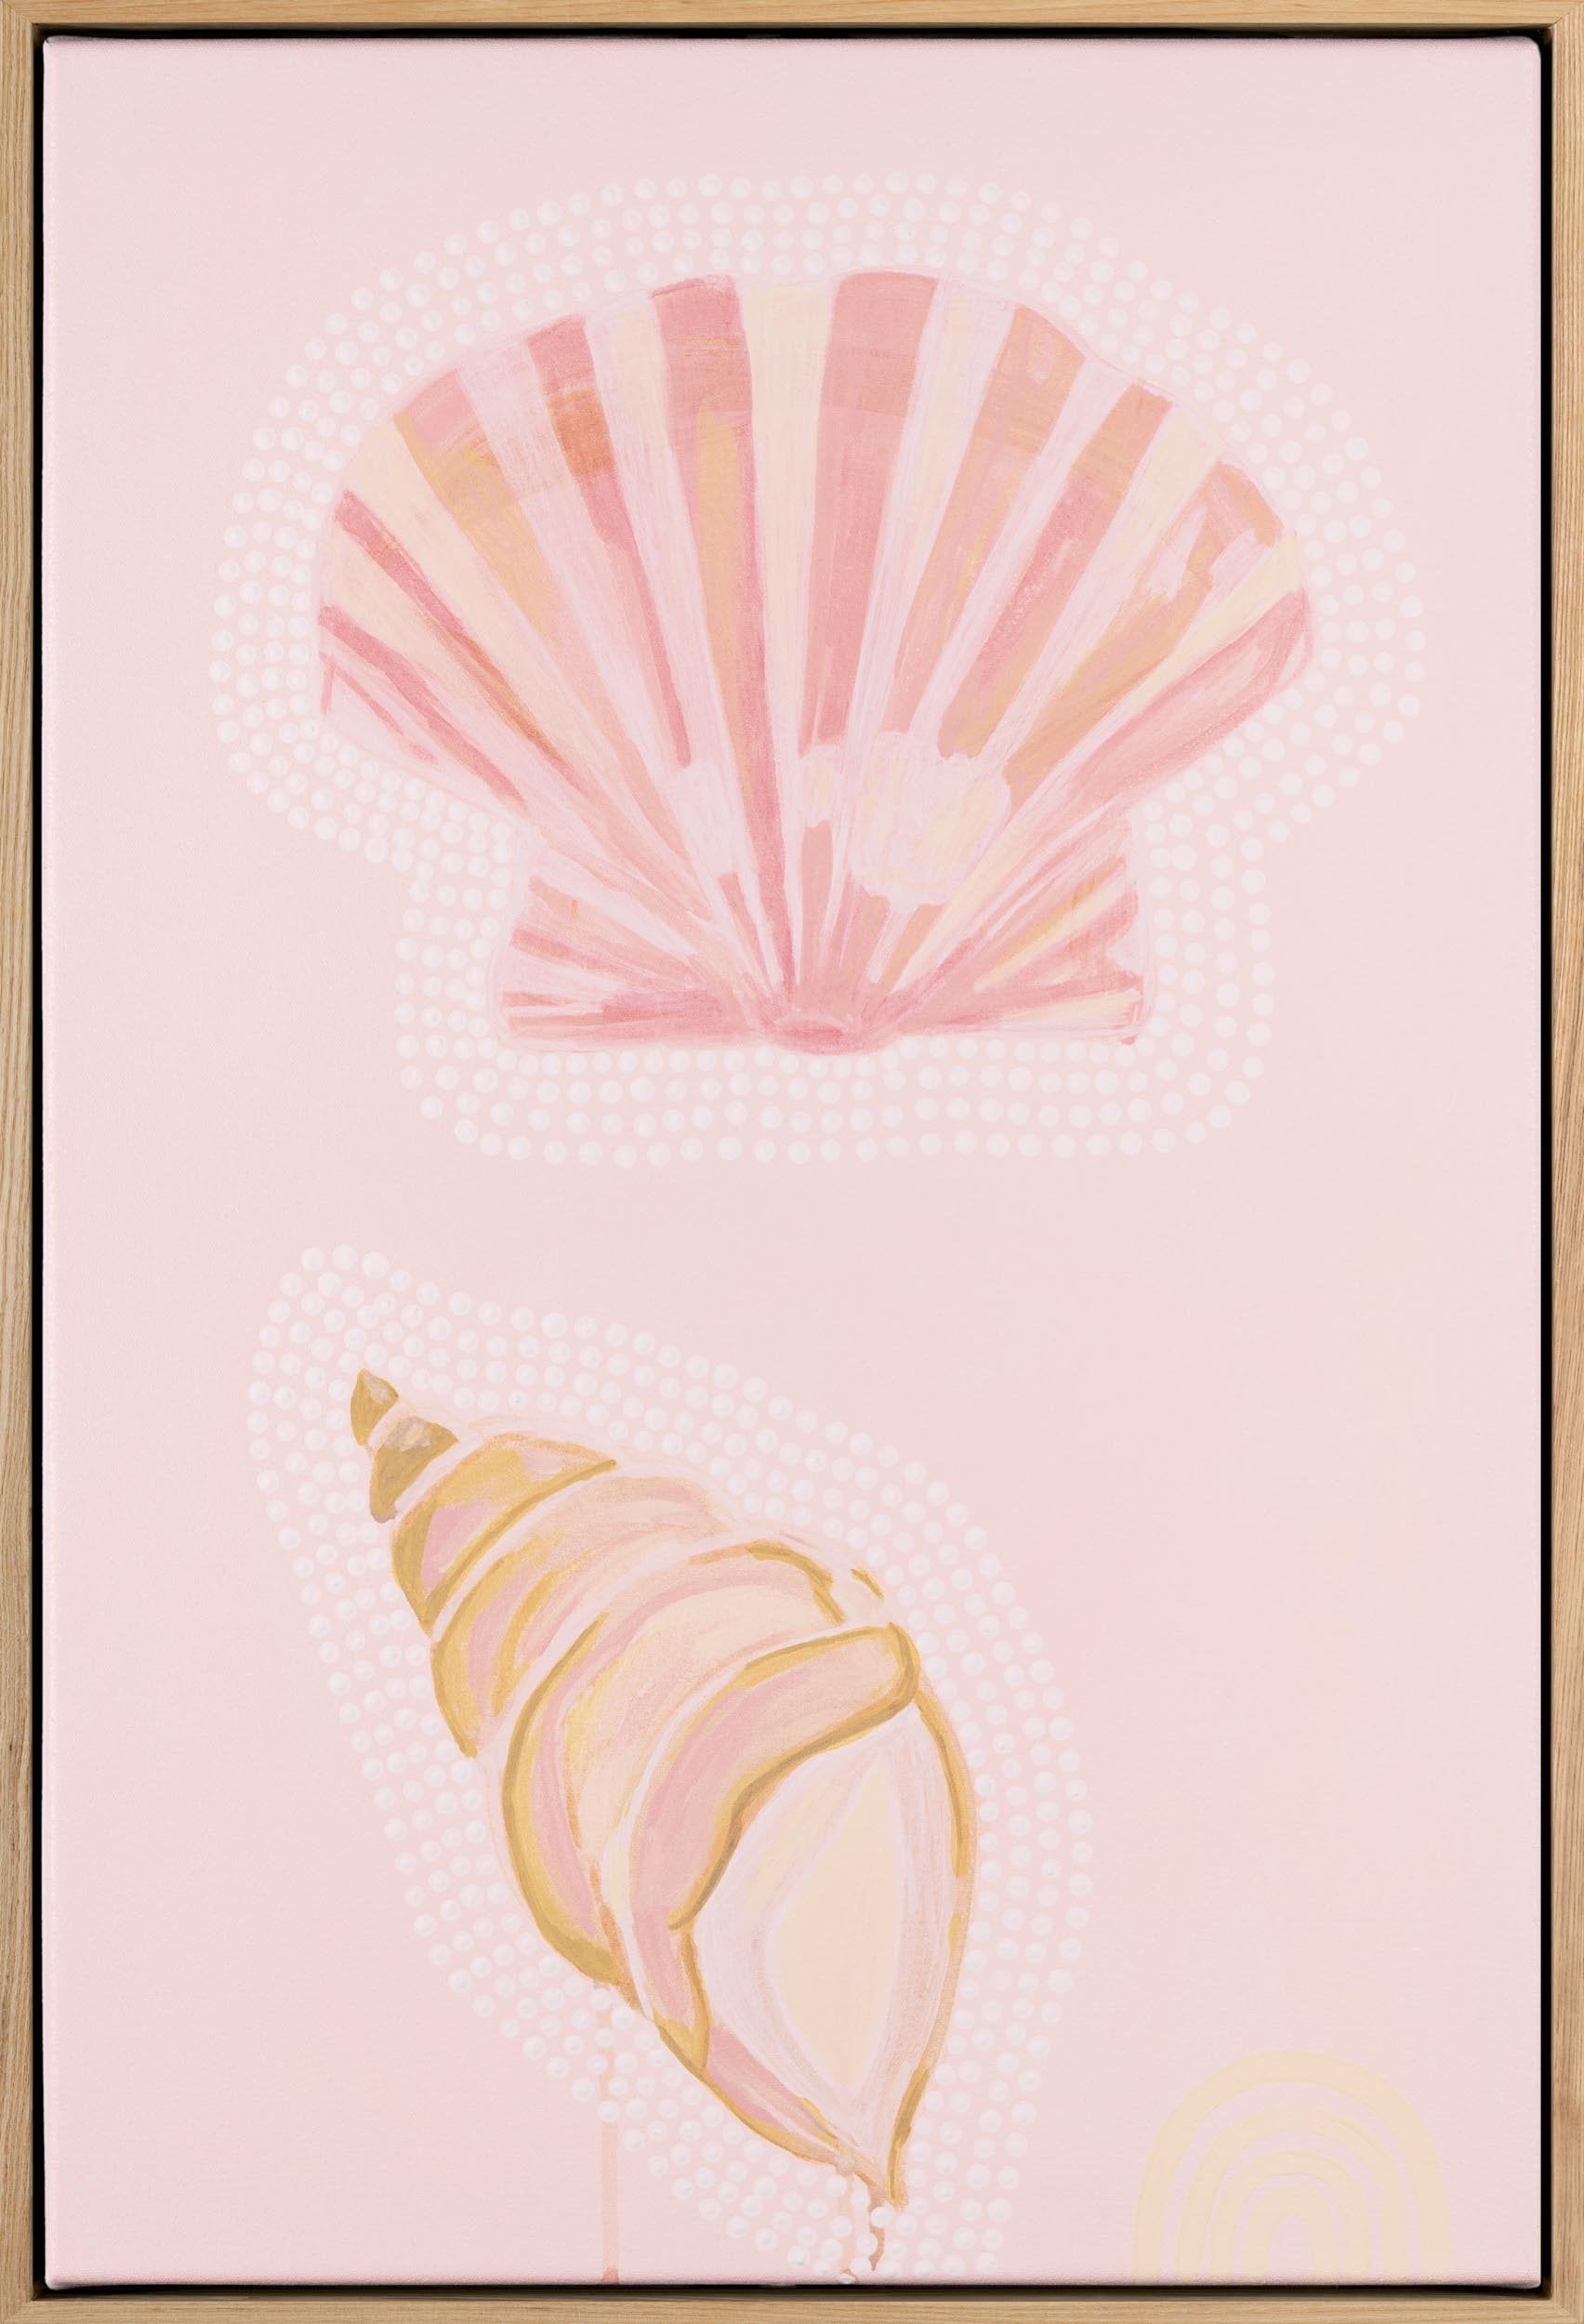 Sea shells by the sea shore - Limited Edition Print